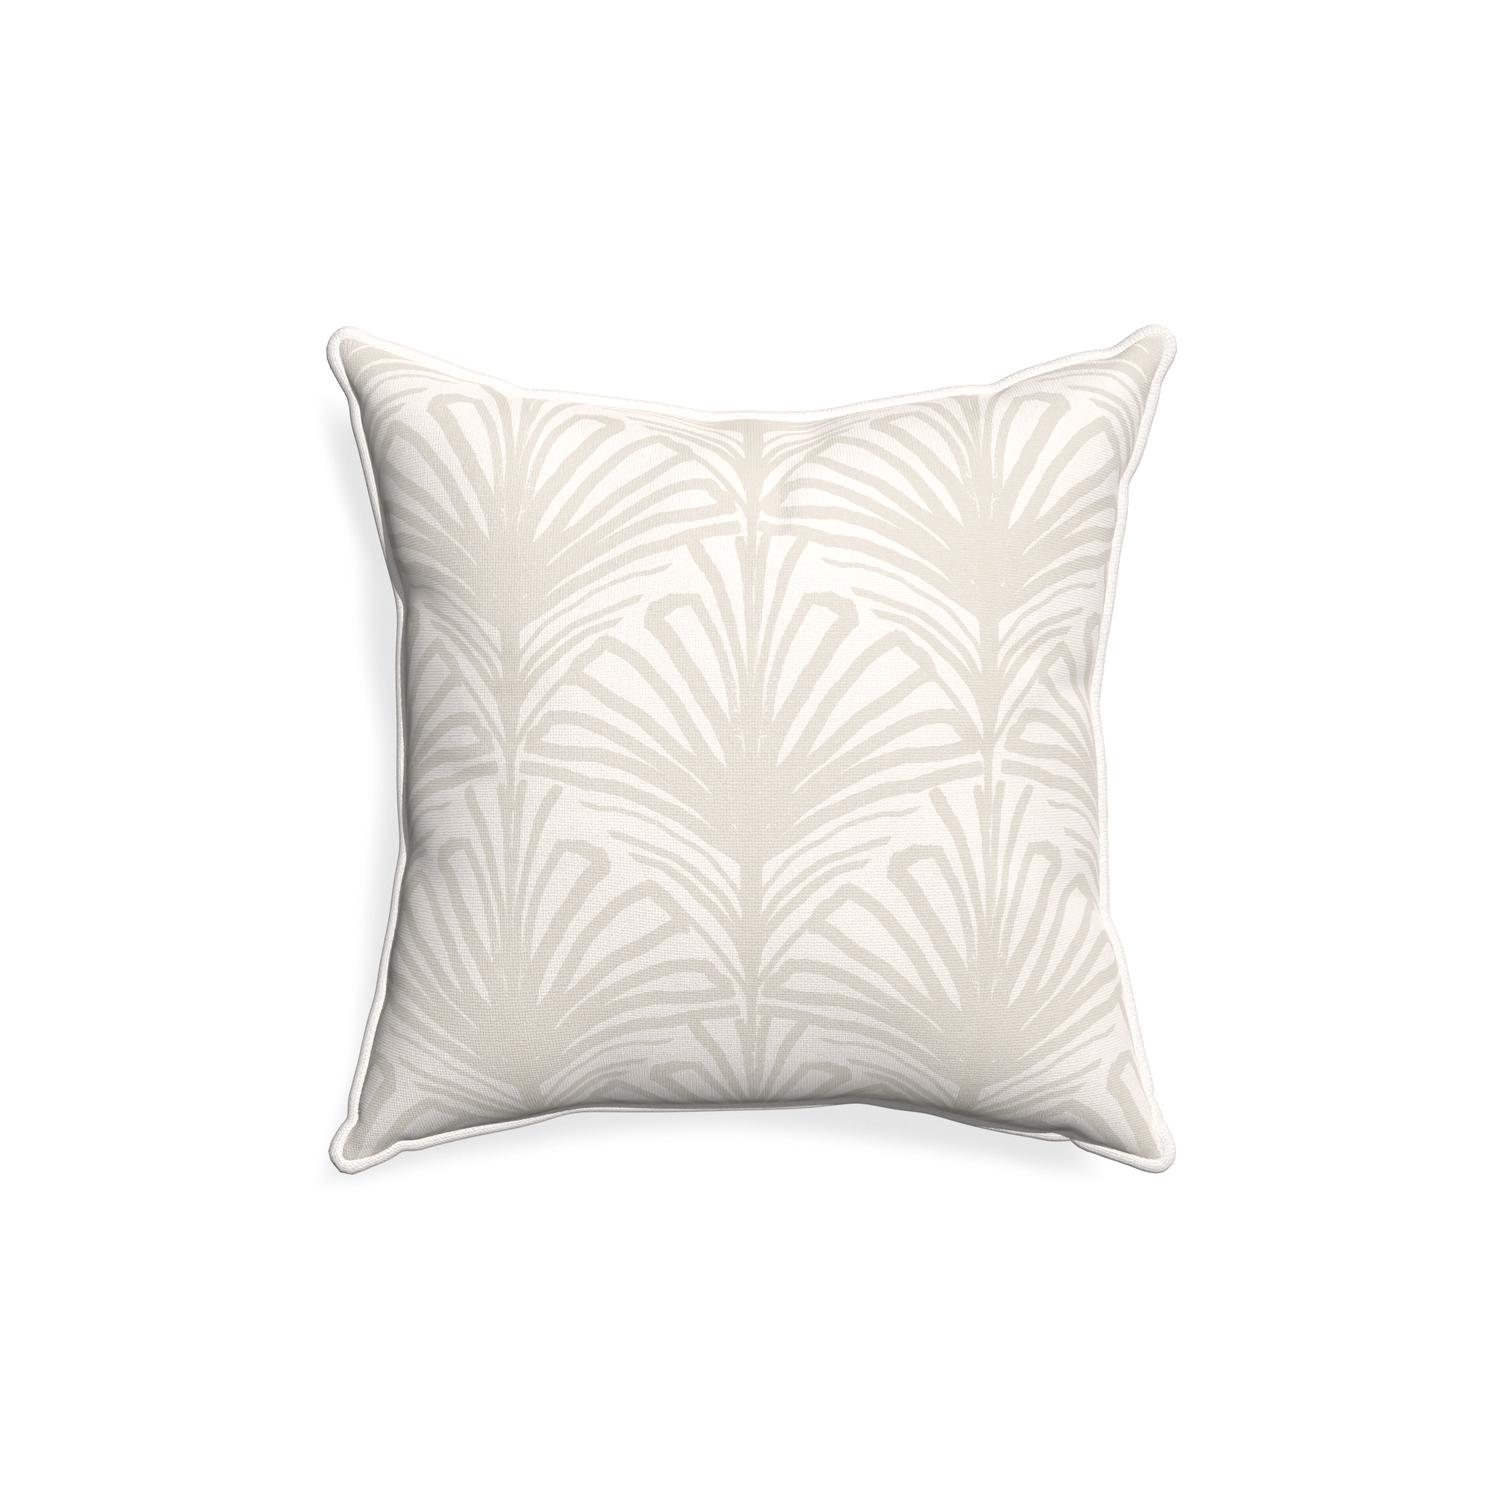 18-square suzy sand custom pillow with snow piping on white background